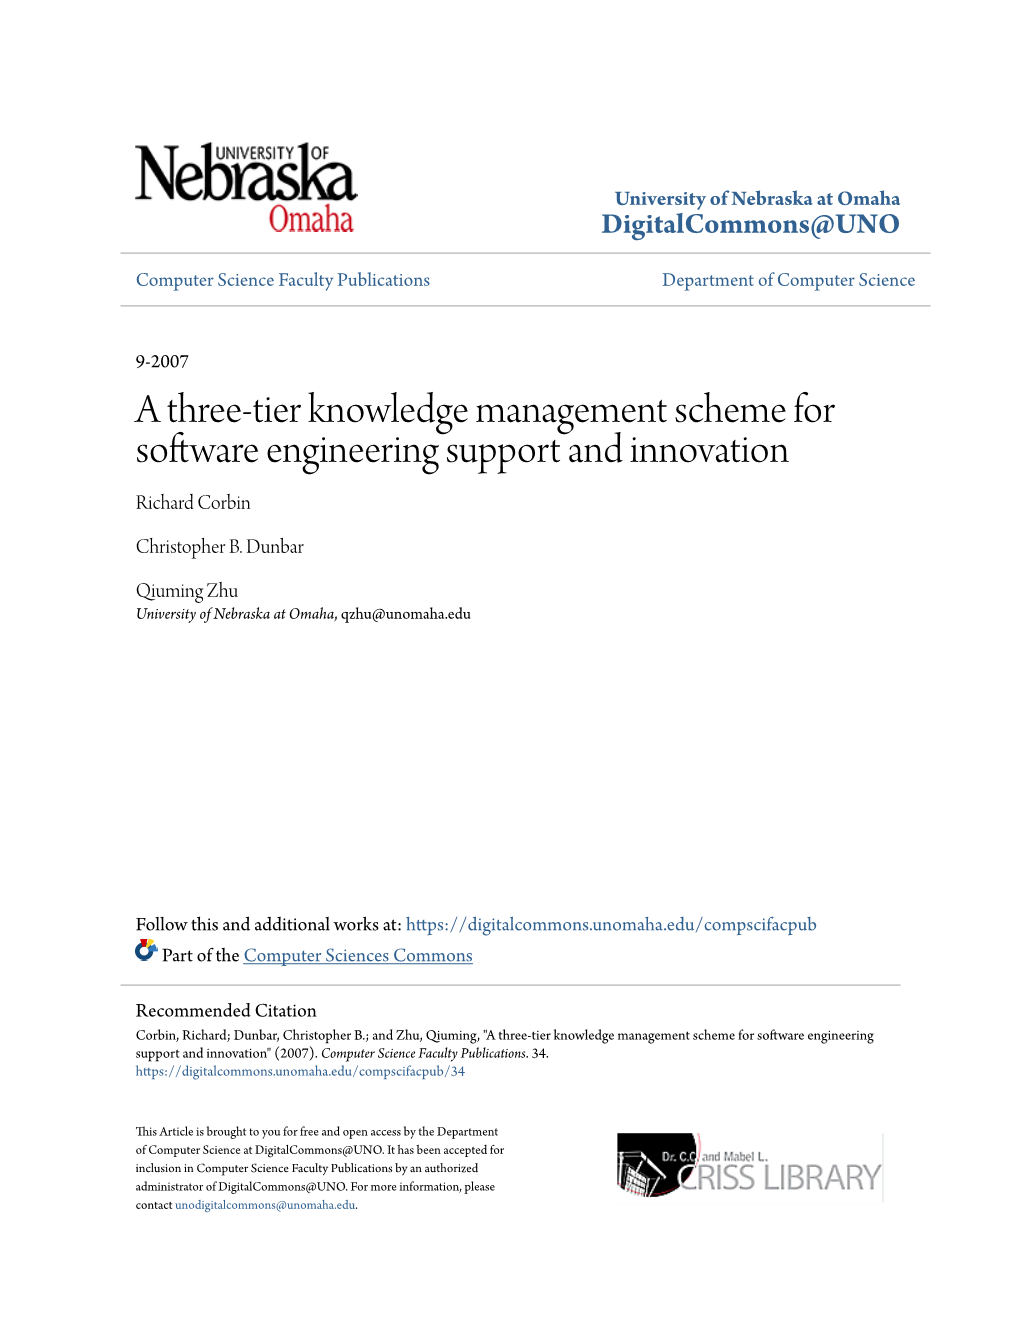 A Three-Tier Knowledge Management Scheme for Software Engineering Support and Innovation Richard Corbin